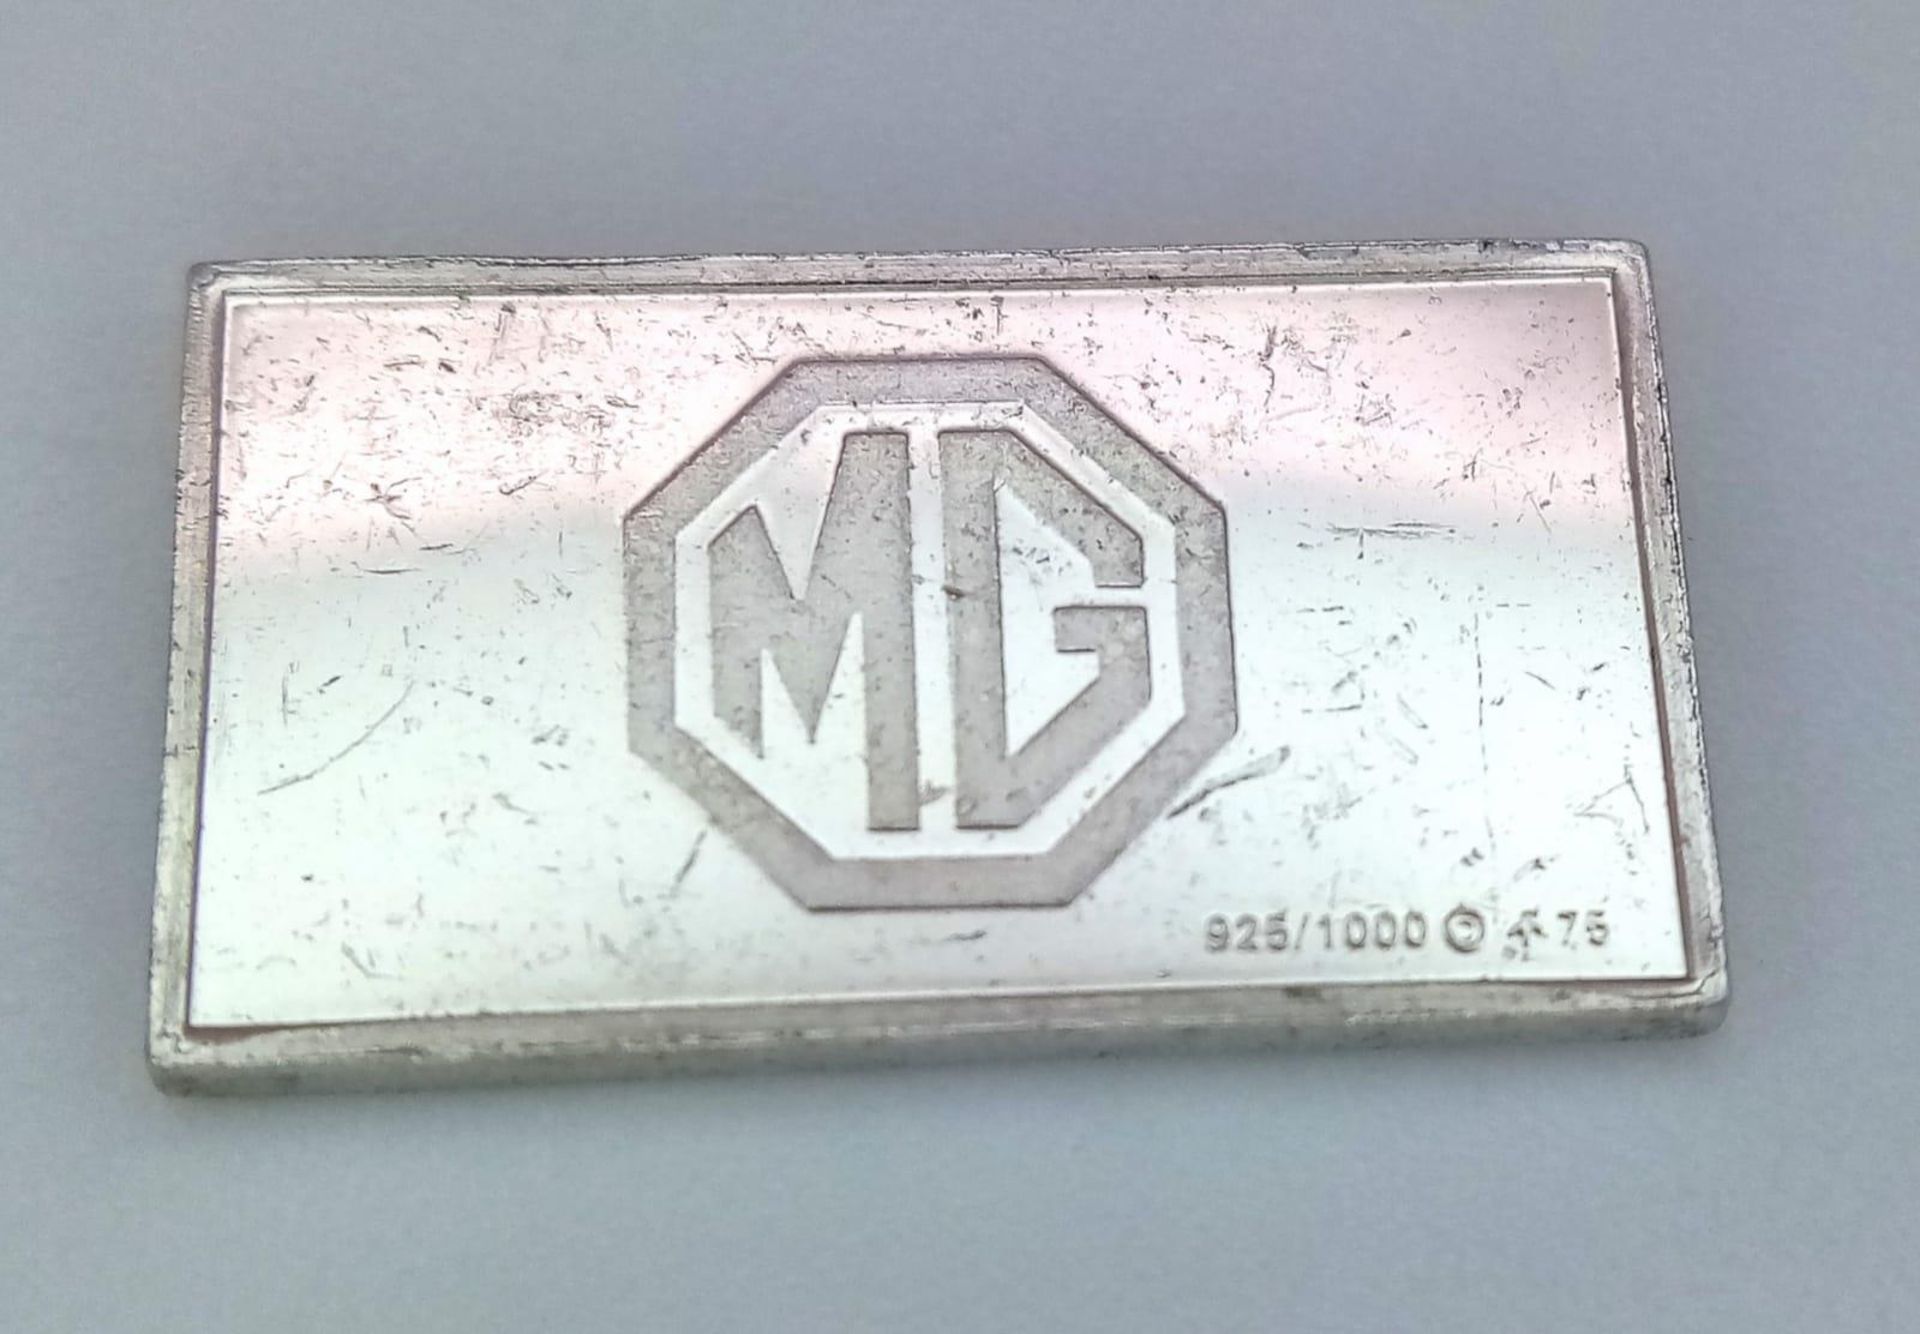 2 X STERLING SILVER AND ENAMEL MG CAR LOGO MANUFACTURER PLAQUES, MADE IN UNITED KINGDOM ENGLAND, - Image 4 of 4